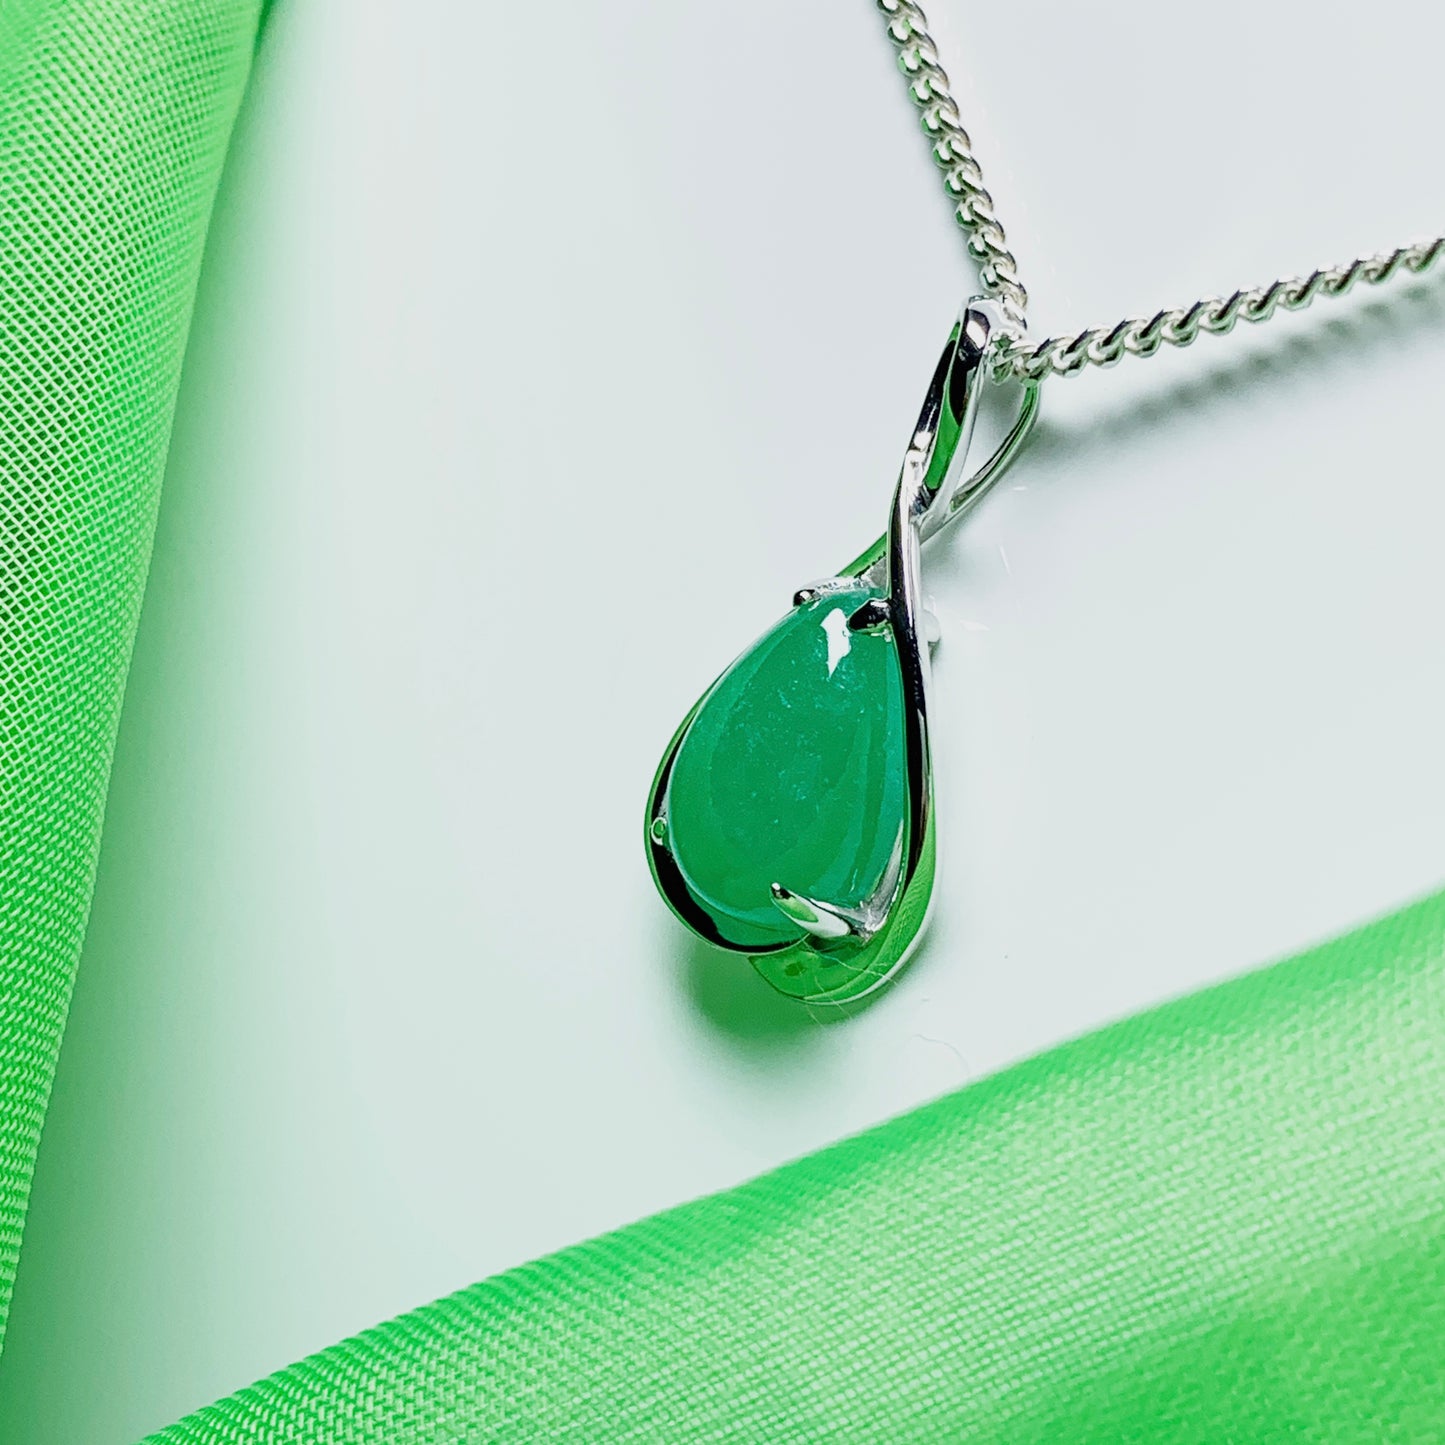 Real jade necklace green pear teardrop shaped pendant white gold